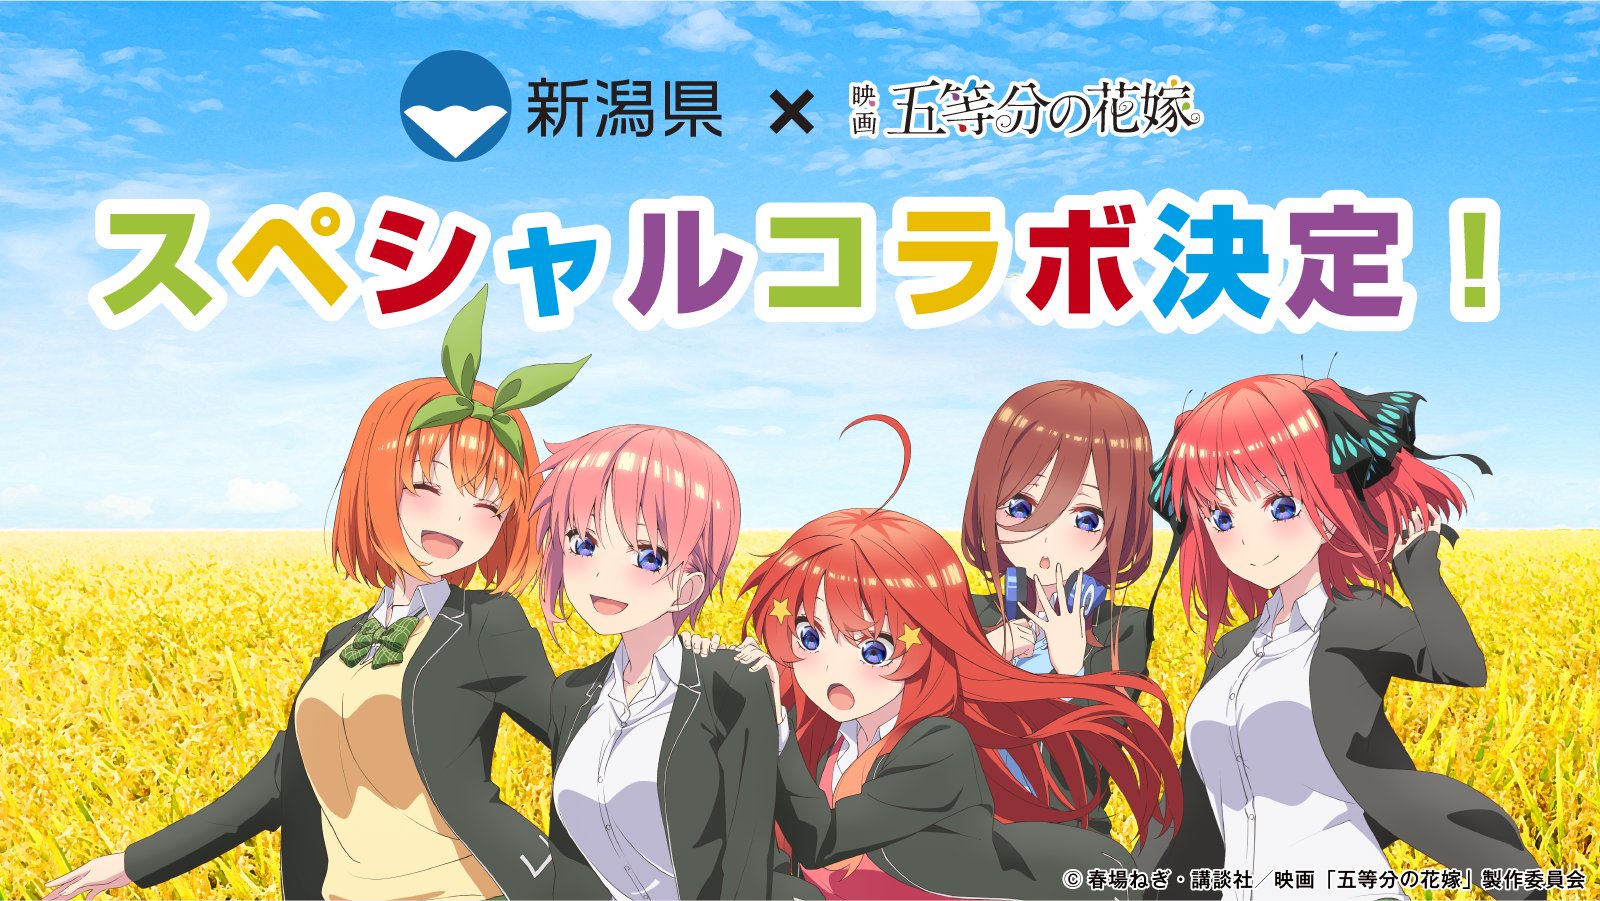 The Quintessential Quintuplets Help Promote Rice to Young People